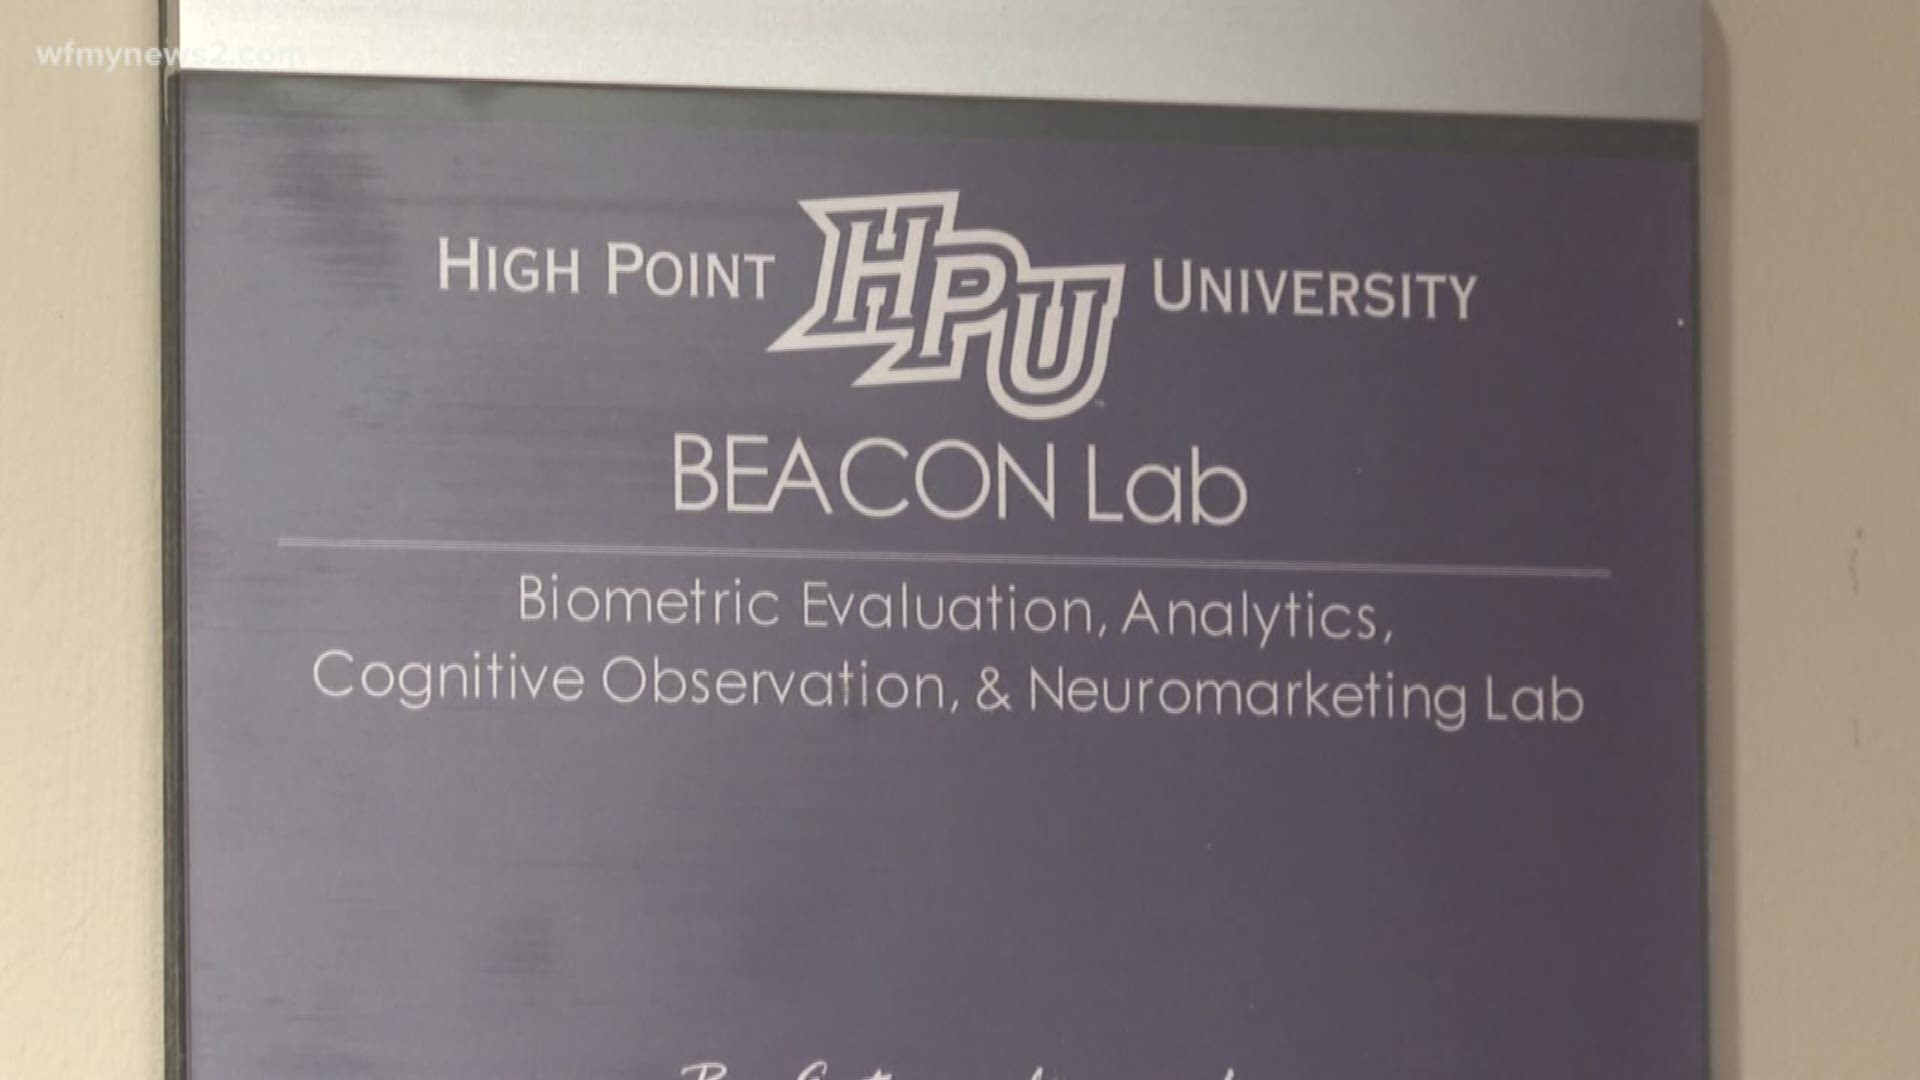 The State-Of-The-Art BEACON lab gives students a firsthand look at what engages customers.